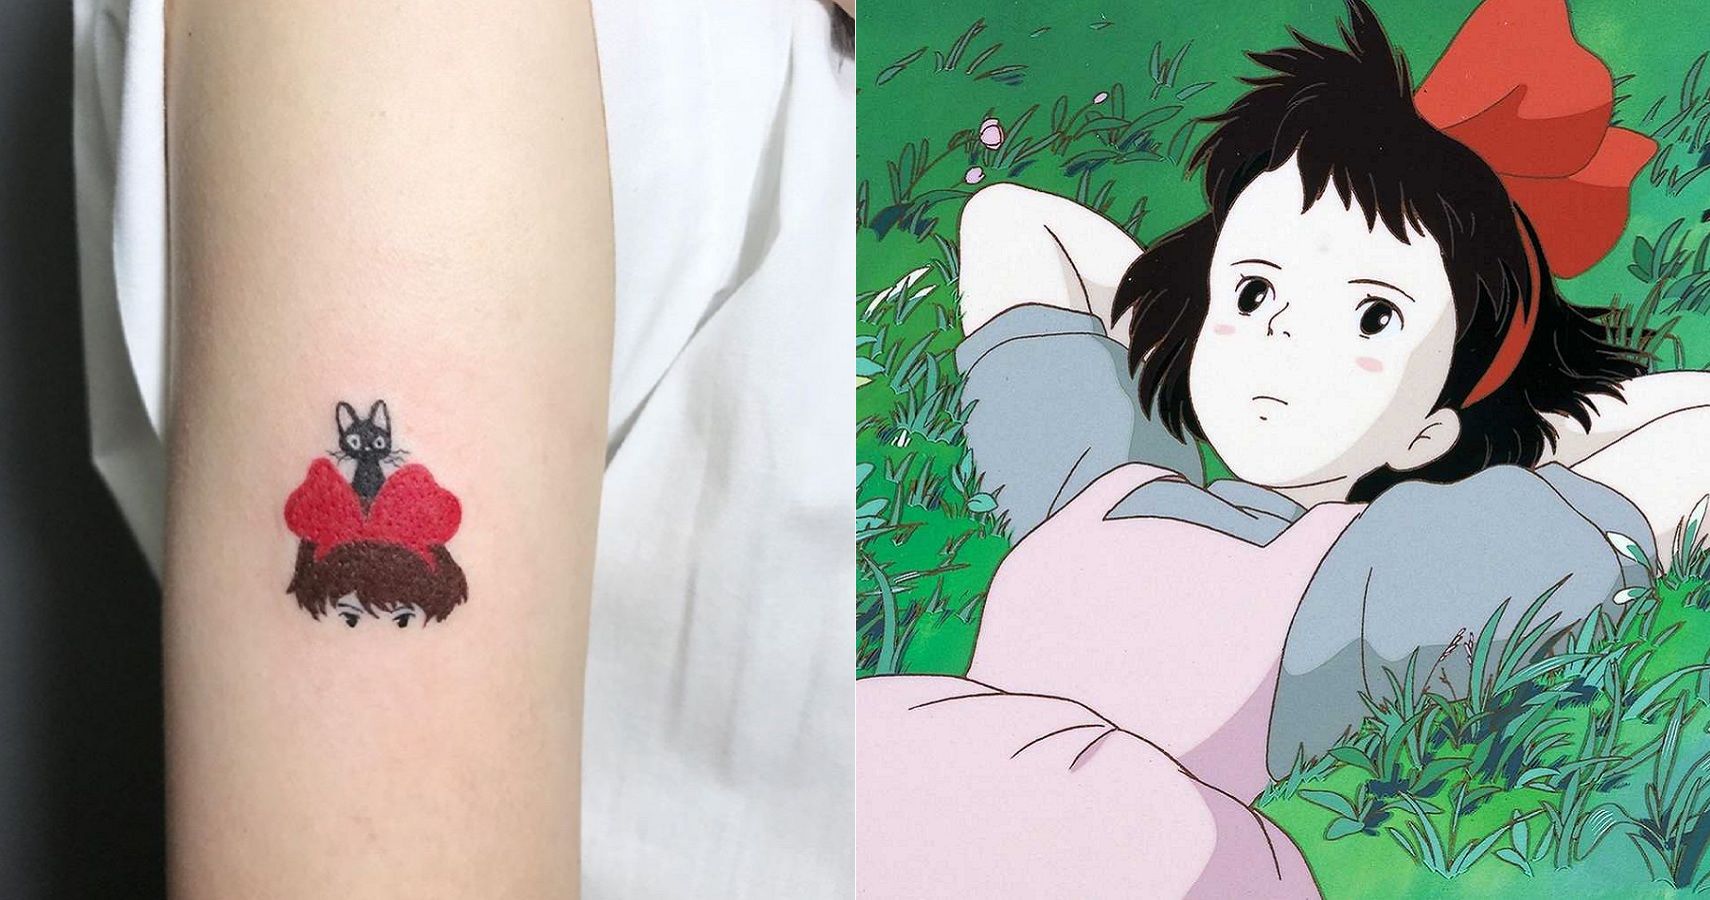 1ANIME TATTOO PAGE on Instagram naruto tattoos done by bingtattoos To  submit your work use the tag animemasterink And dont forget to share our  page